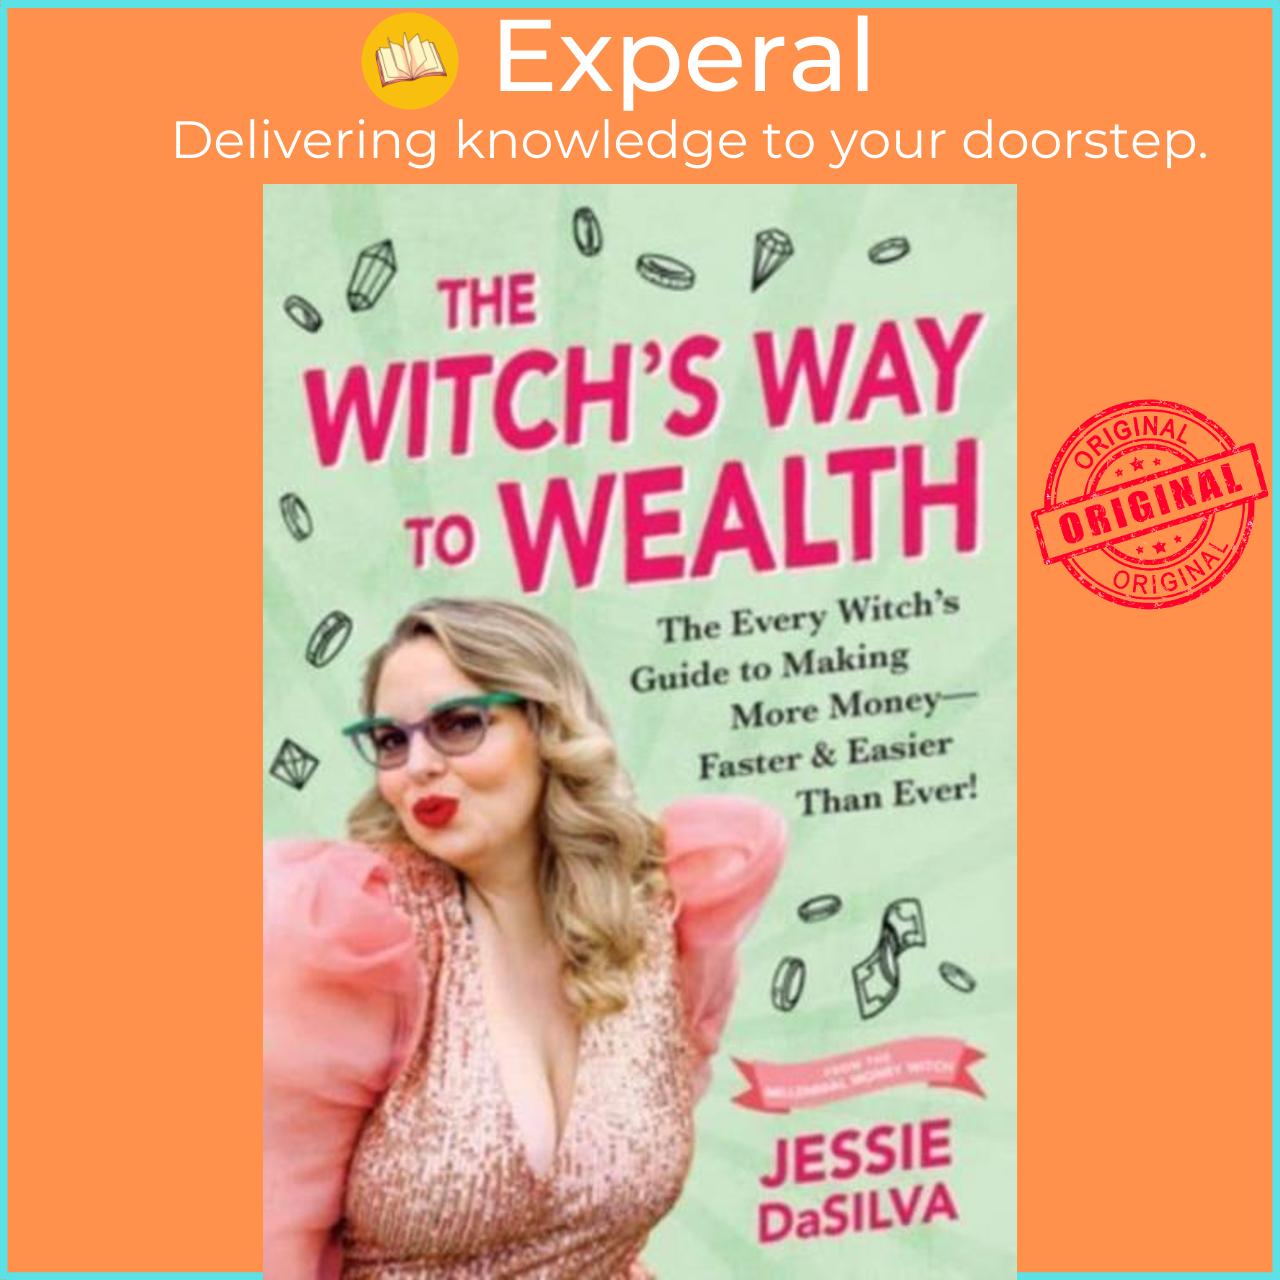 Sách - The Witch's Way to Wealth - The Every Witch's Guide to Making More Mone by Jessie DaSilva (UK edition, paperback)